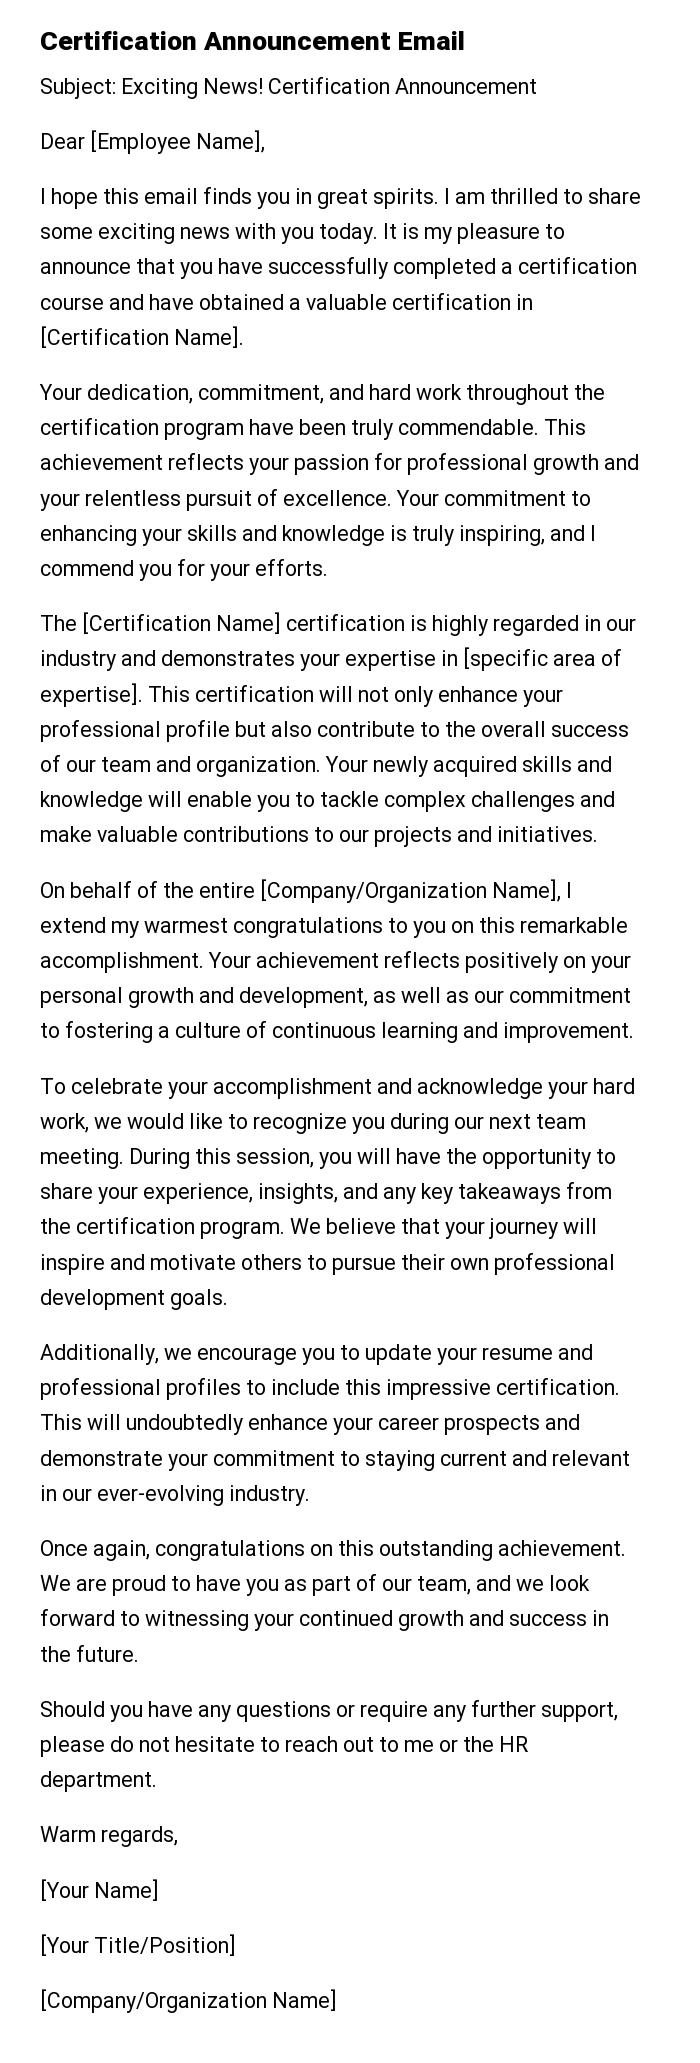 Certification Announcement Email